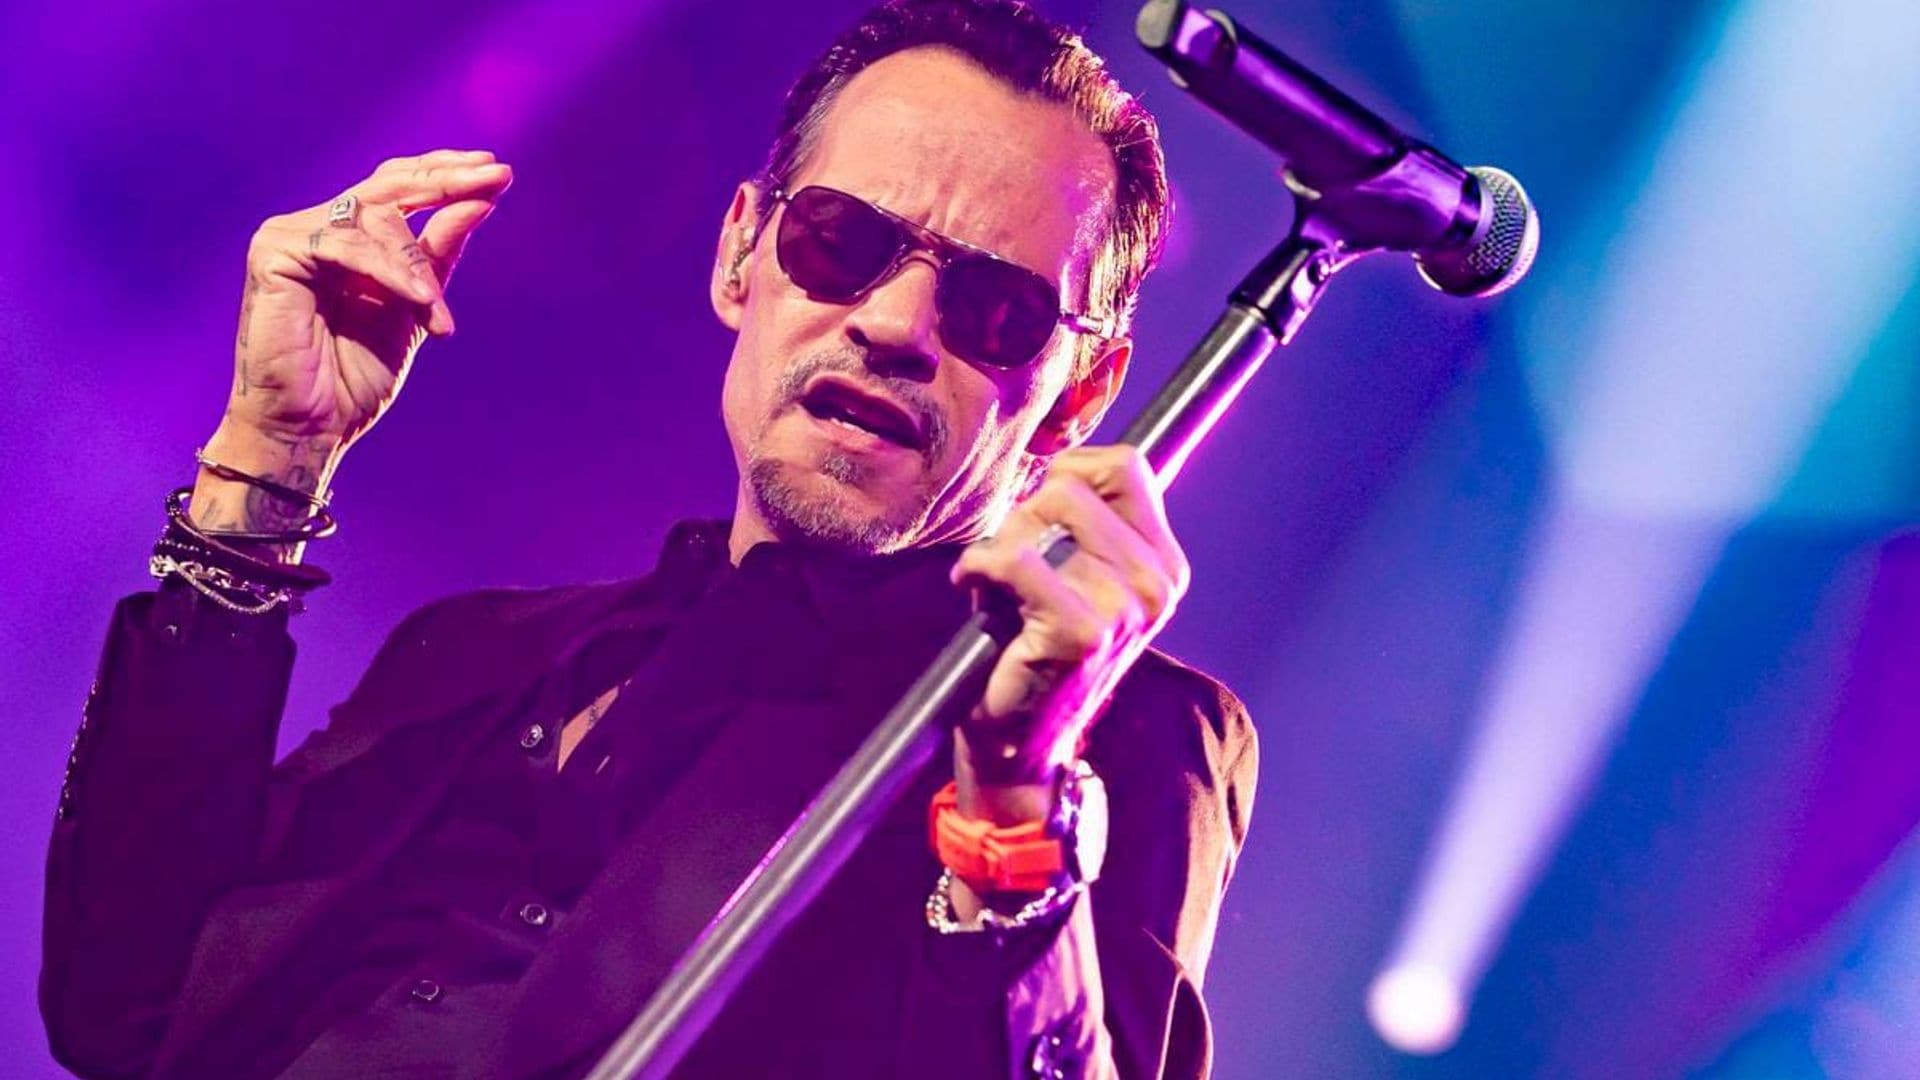 Marc Anthony will perform the National Anthem at Miami Grand Prix